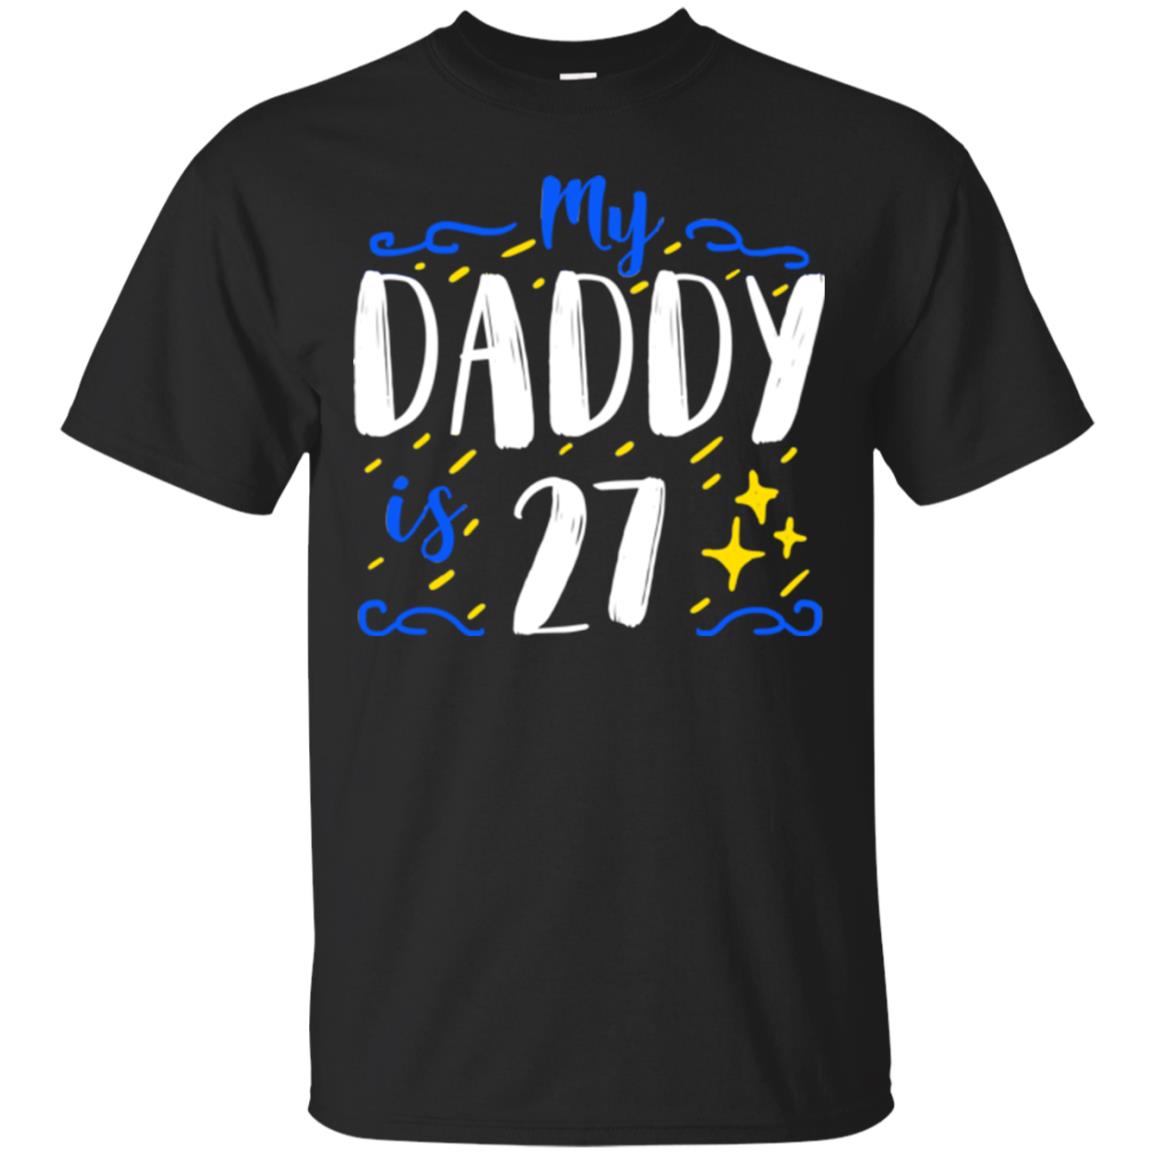 My Daddy Is 27 27th Birthday Daddy Shirt For Sons Or DaughtersG200 Gildan Ultra Cotton T-Shirt